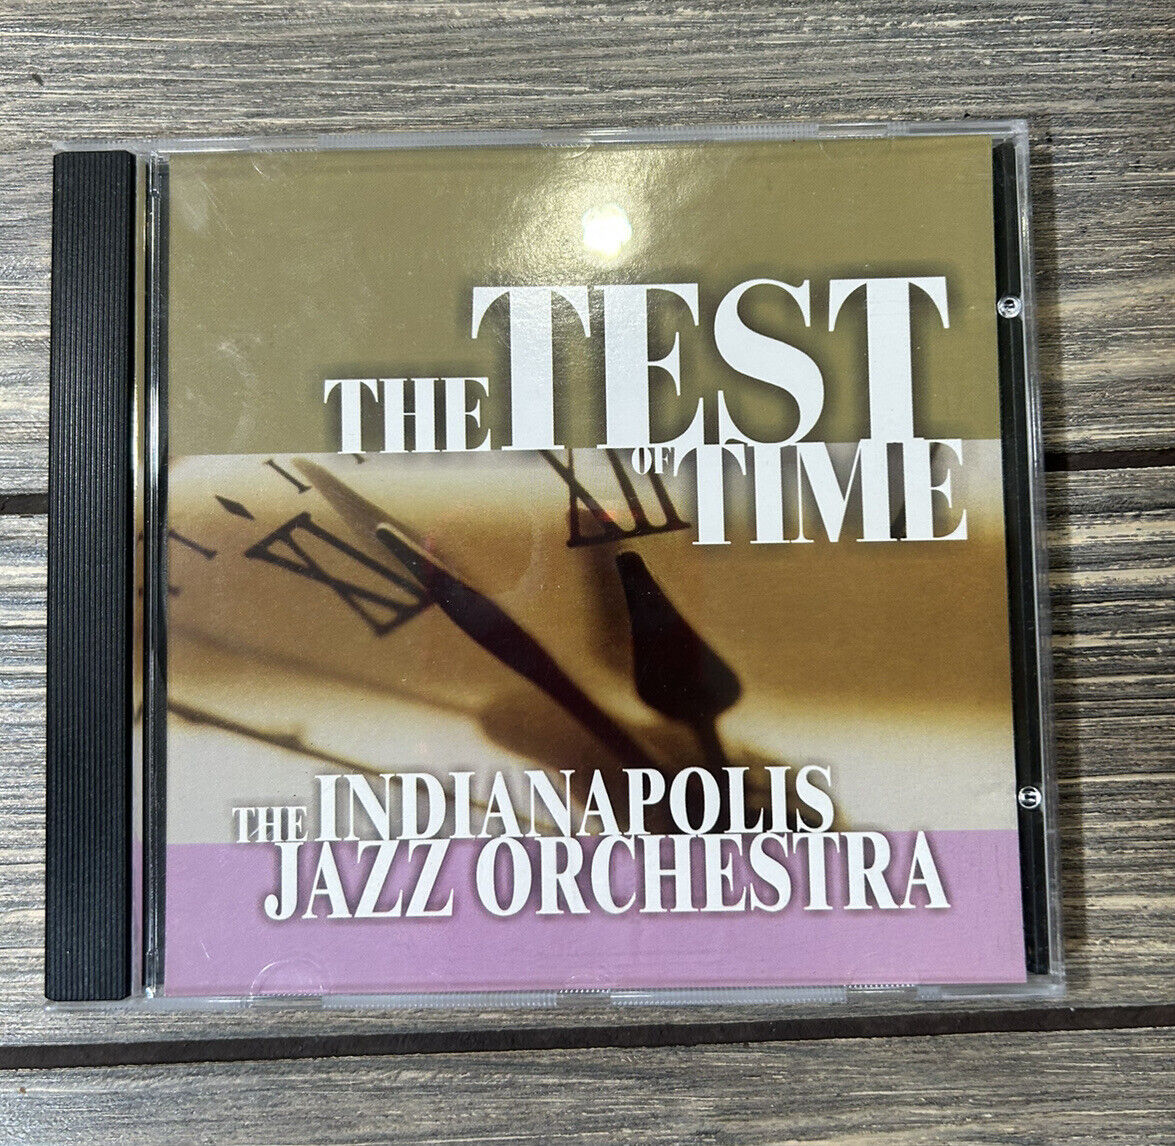 Vintage 2002 The Test Time CD The Indianapolis Jazz Orchestra 